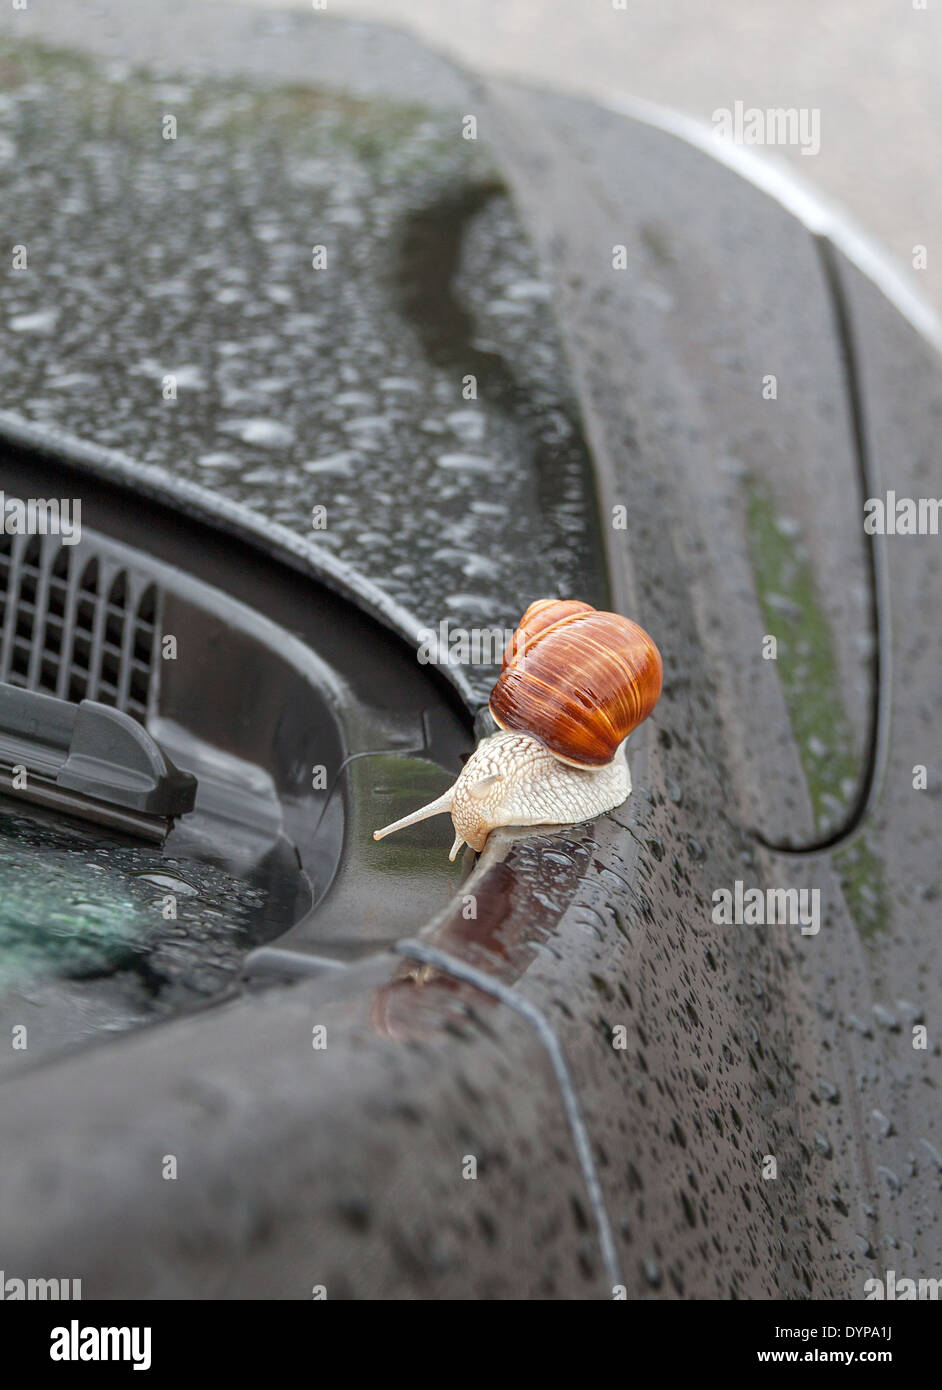 Path, trail, steps... Snail on the car in the rain. Stock Photo